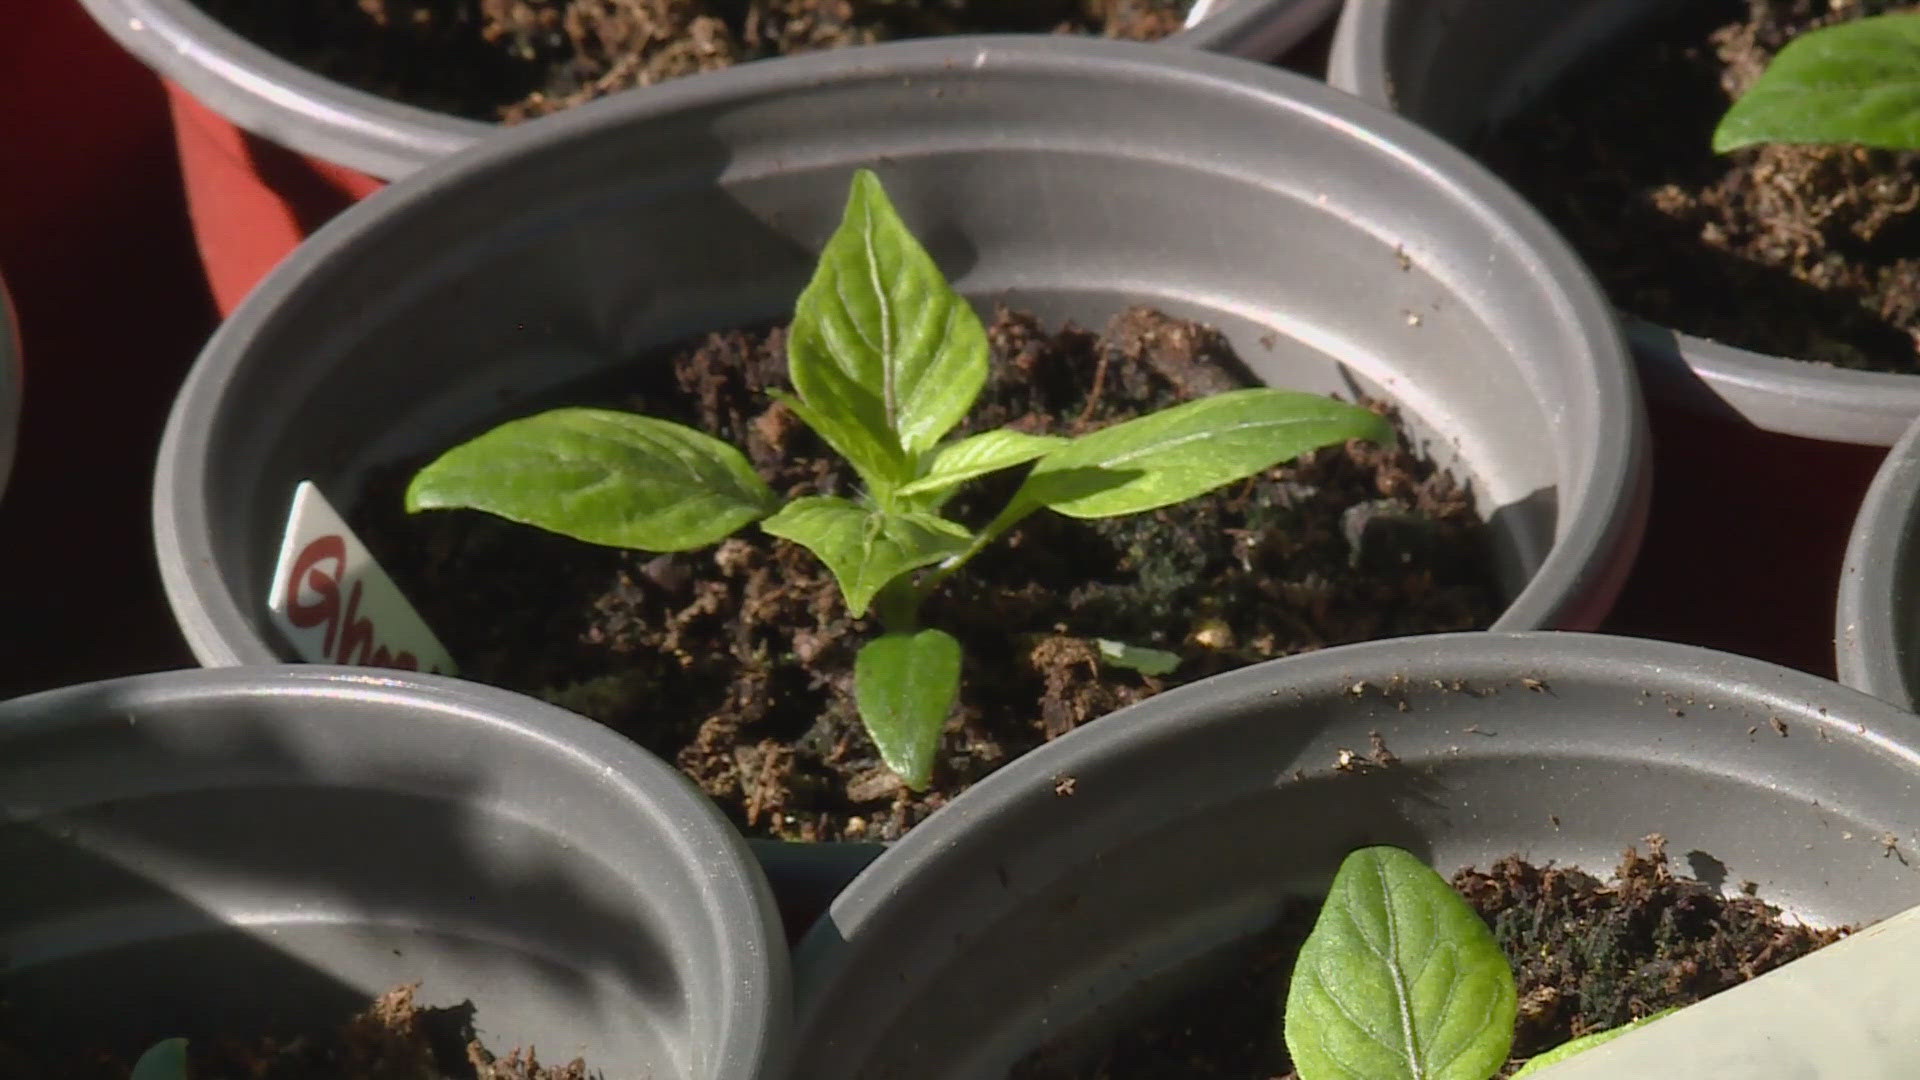 Although a widespread freeze in the Denver metro is unlikely, the safest move would be to wait for the weekend after Mother's Day to plant sensitive vegetables.